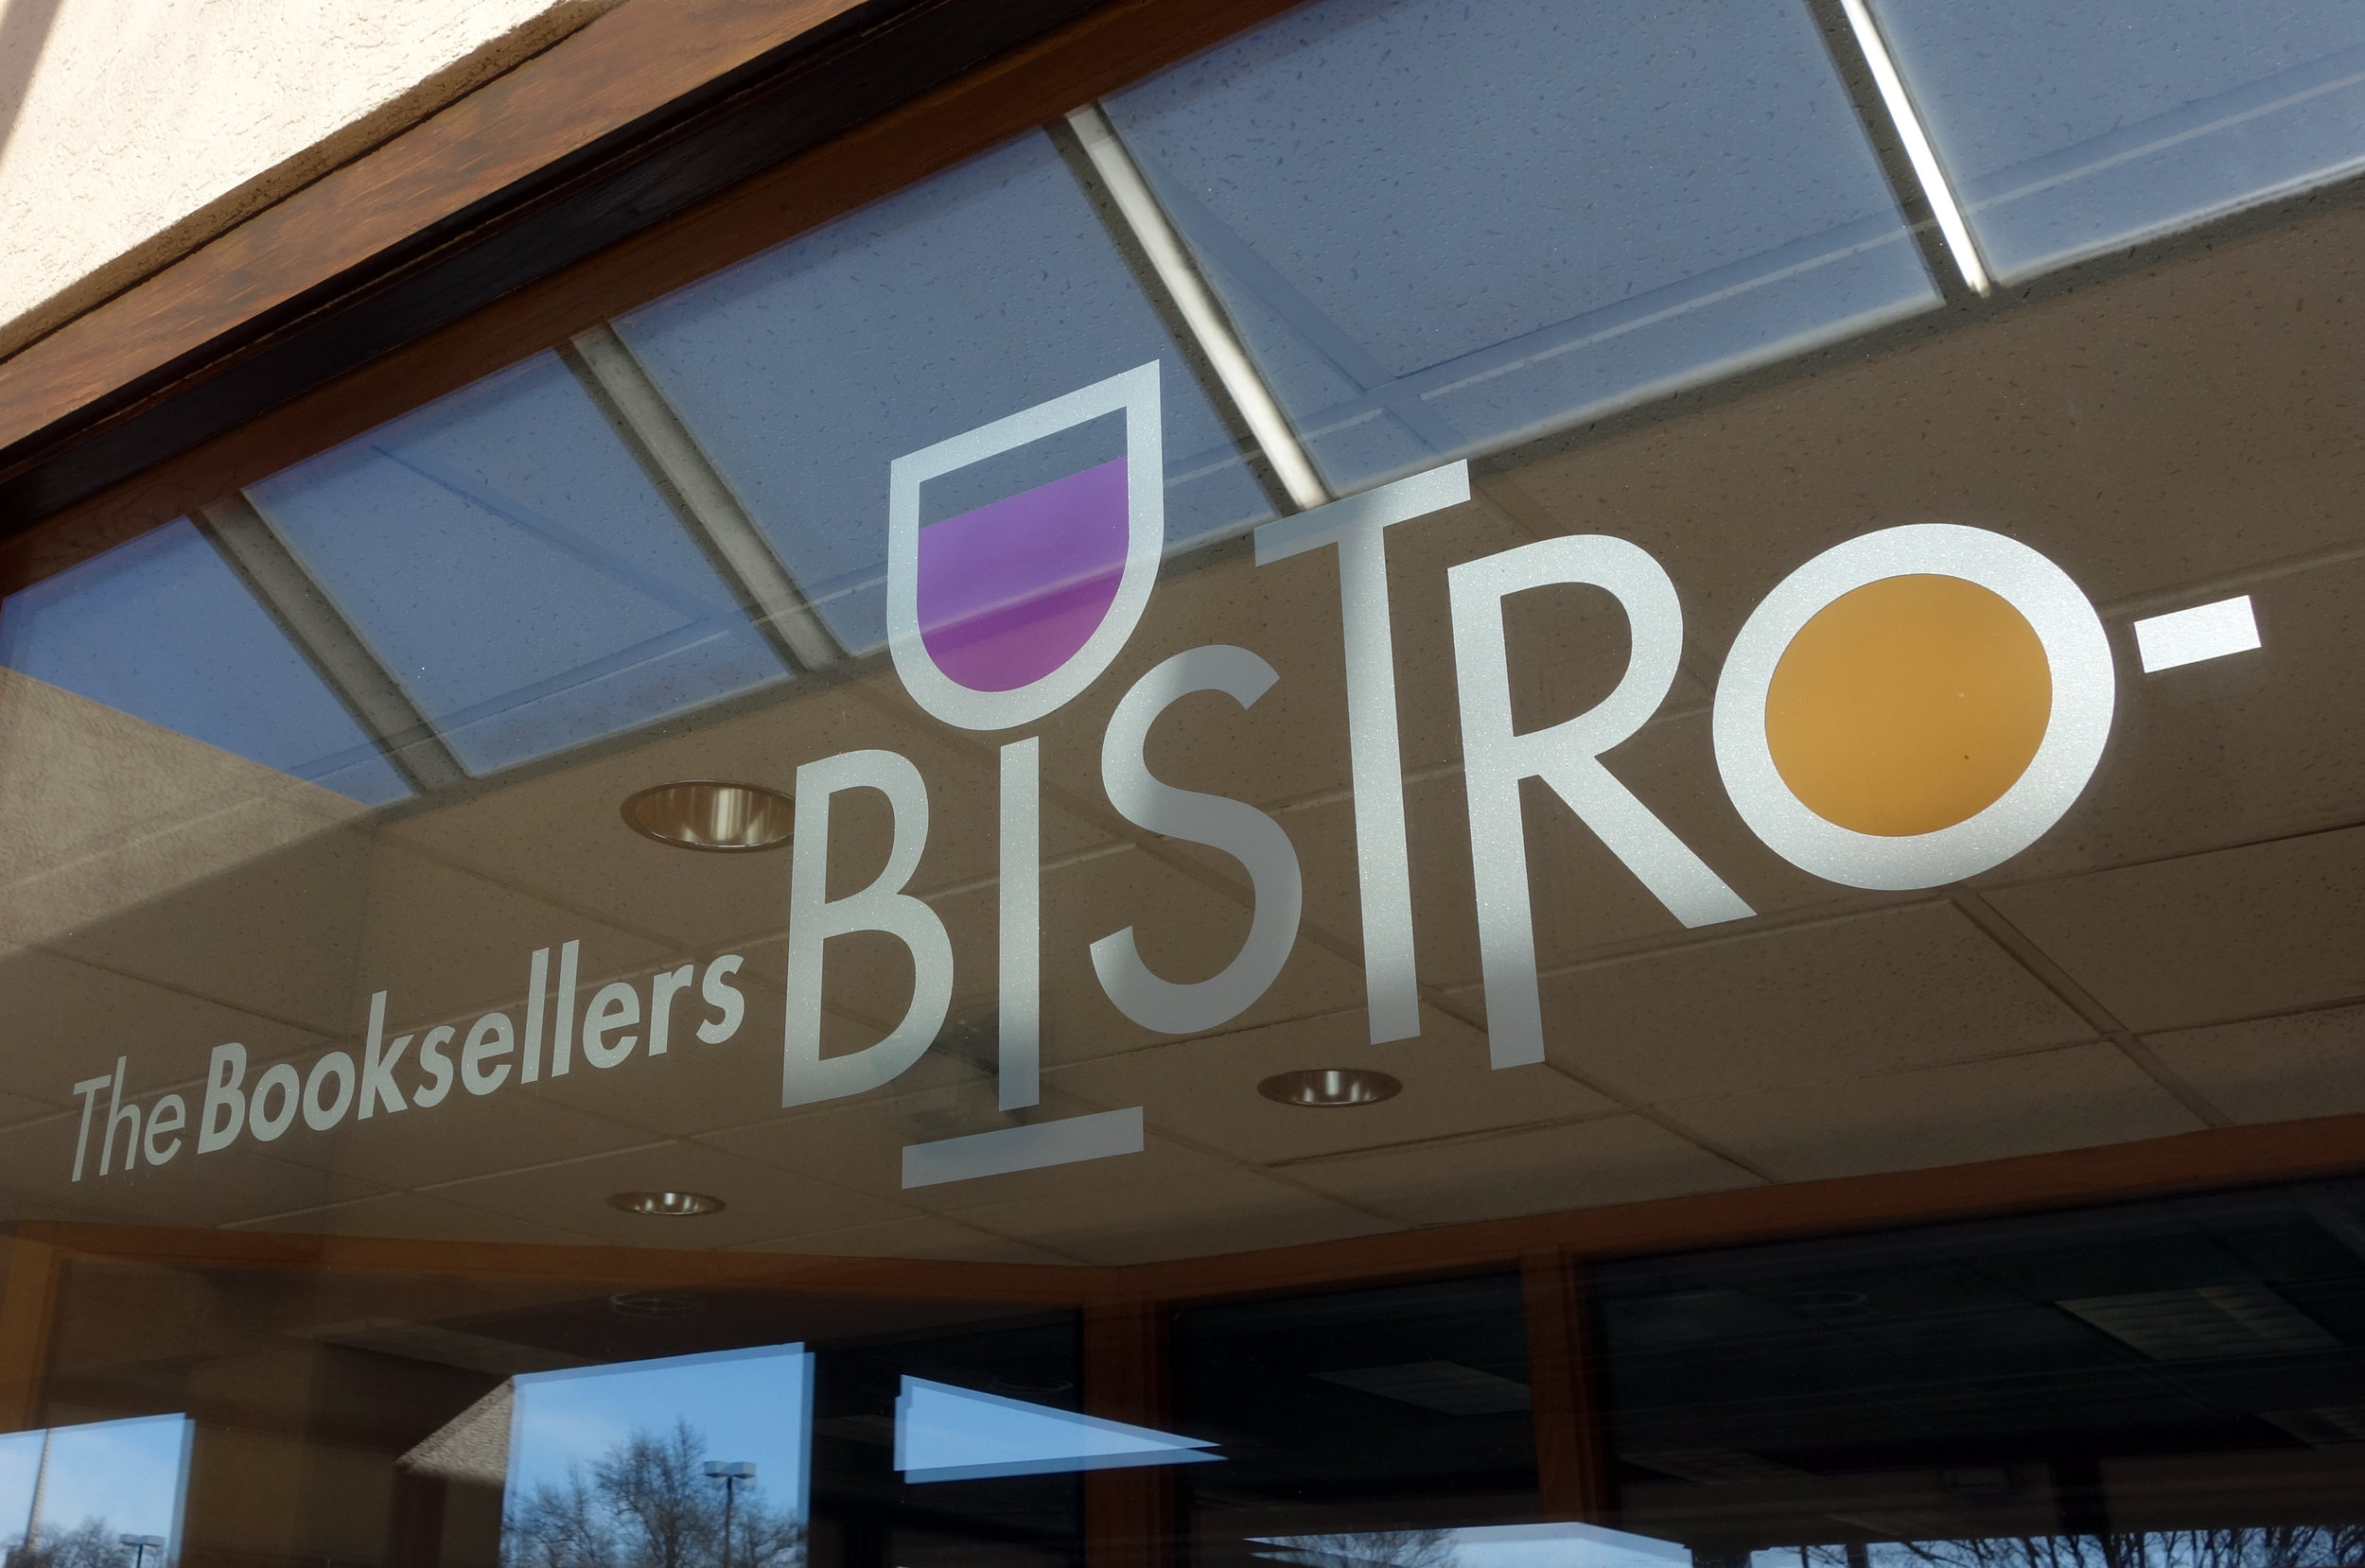  The Booksellers Bistro exterior signage  Creative and design by Chuck Mitchell  Laurelwood Center Memphis, Tennessee  Sign fabrication and installation by Frank Balton Sign Company 